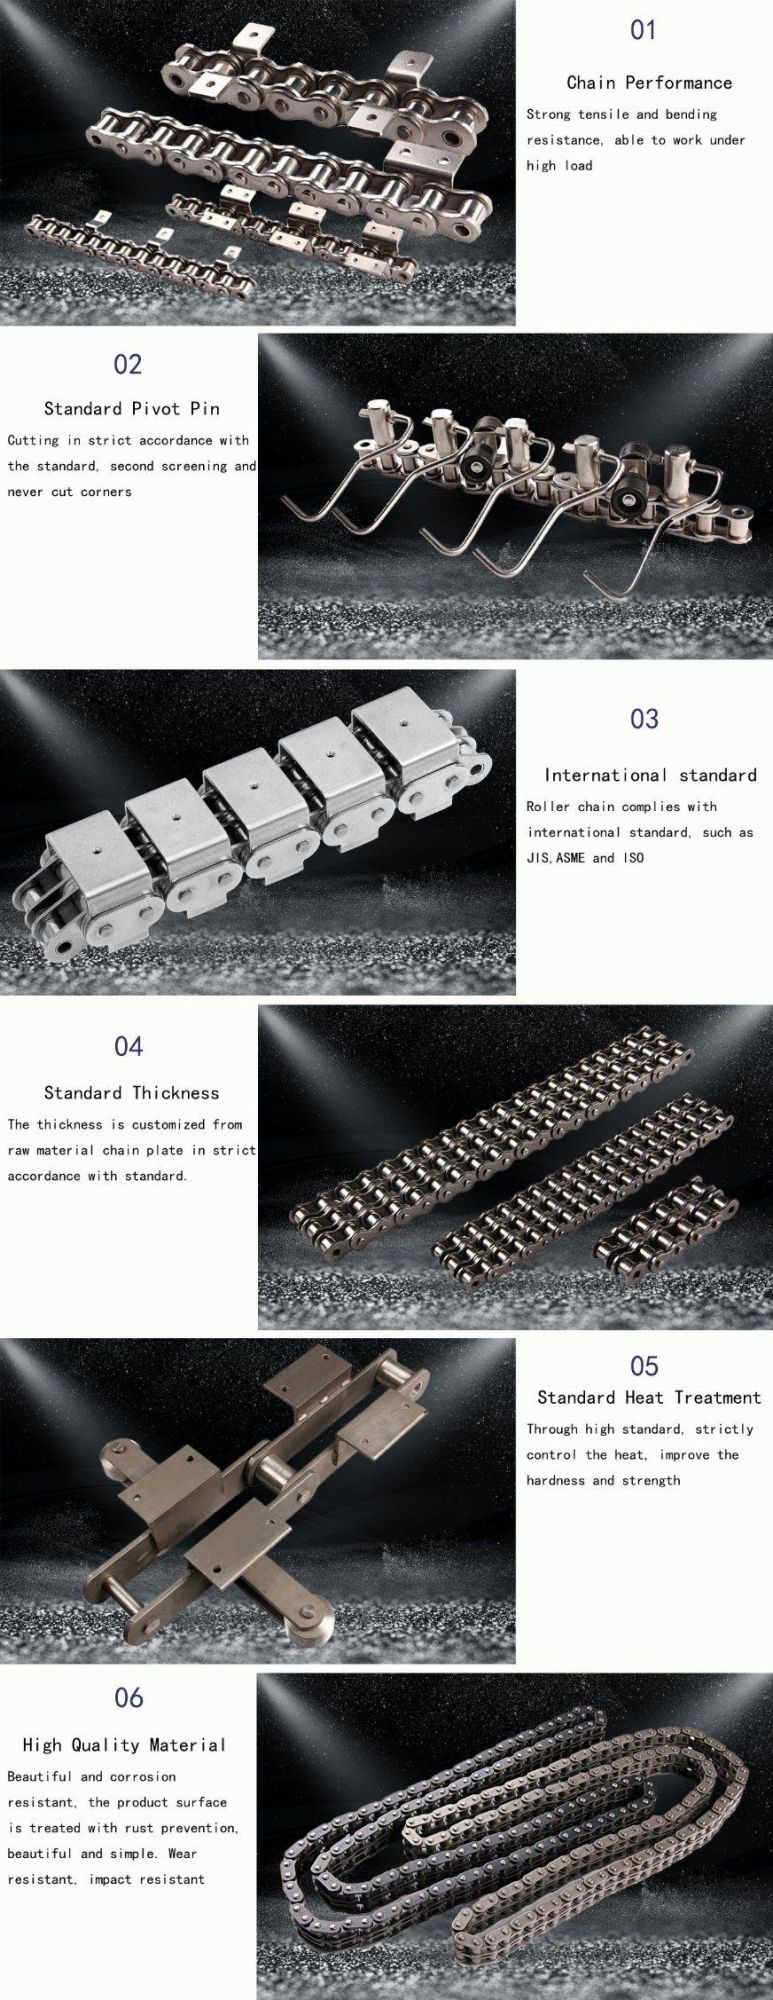 300 Series Stainless Steel Agricultural Roller Chain for Harvester Combine Tractors